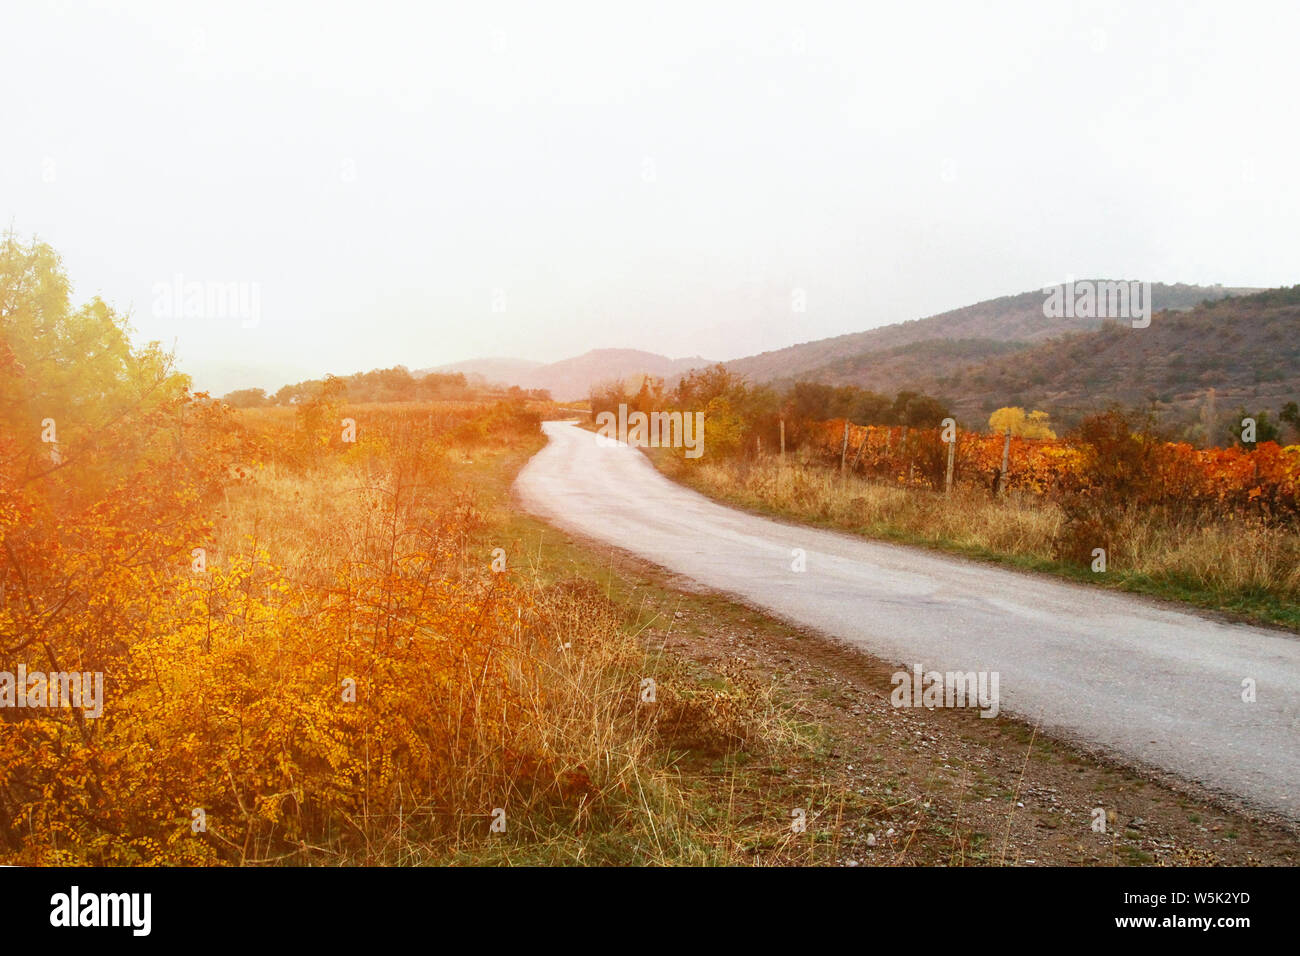 The road goes into the distance. Autumn road through vineyards and villages. Crimea. Koktebel. Stock Photo